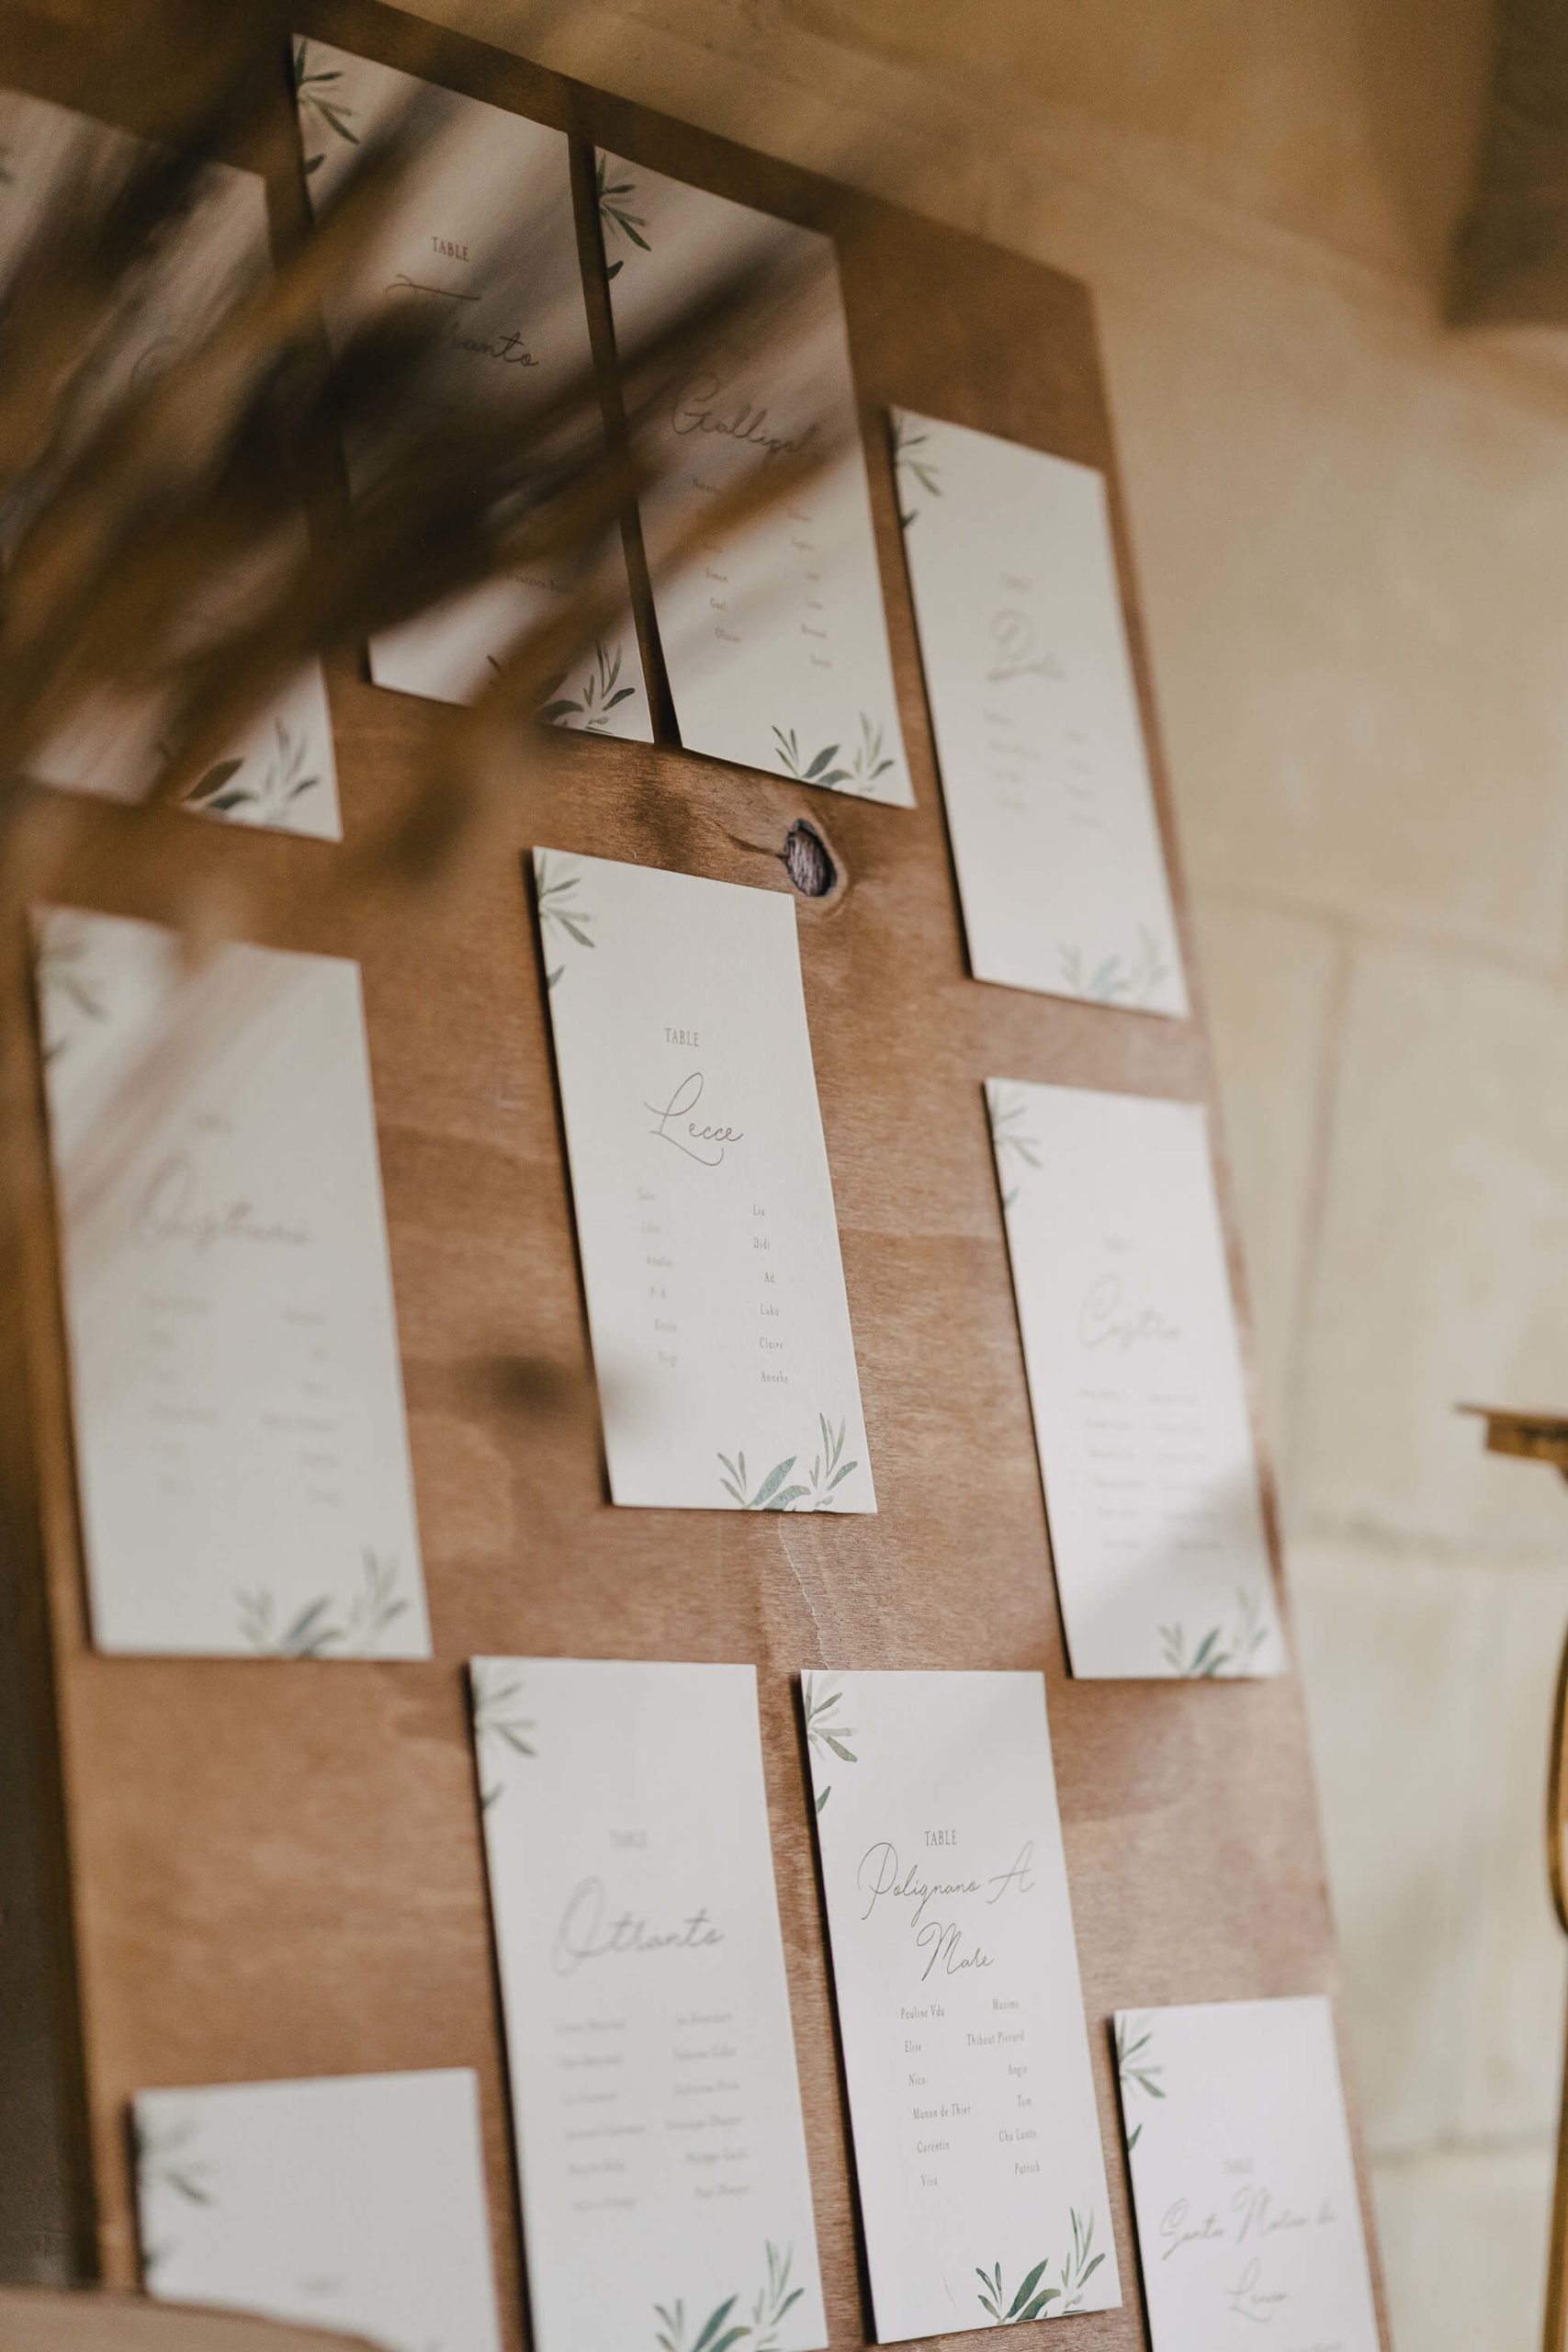 Comment organiser son mariage : 5 applications indispensables